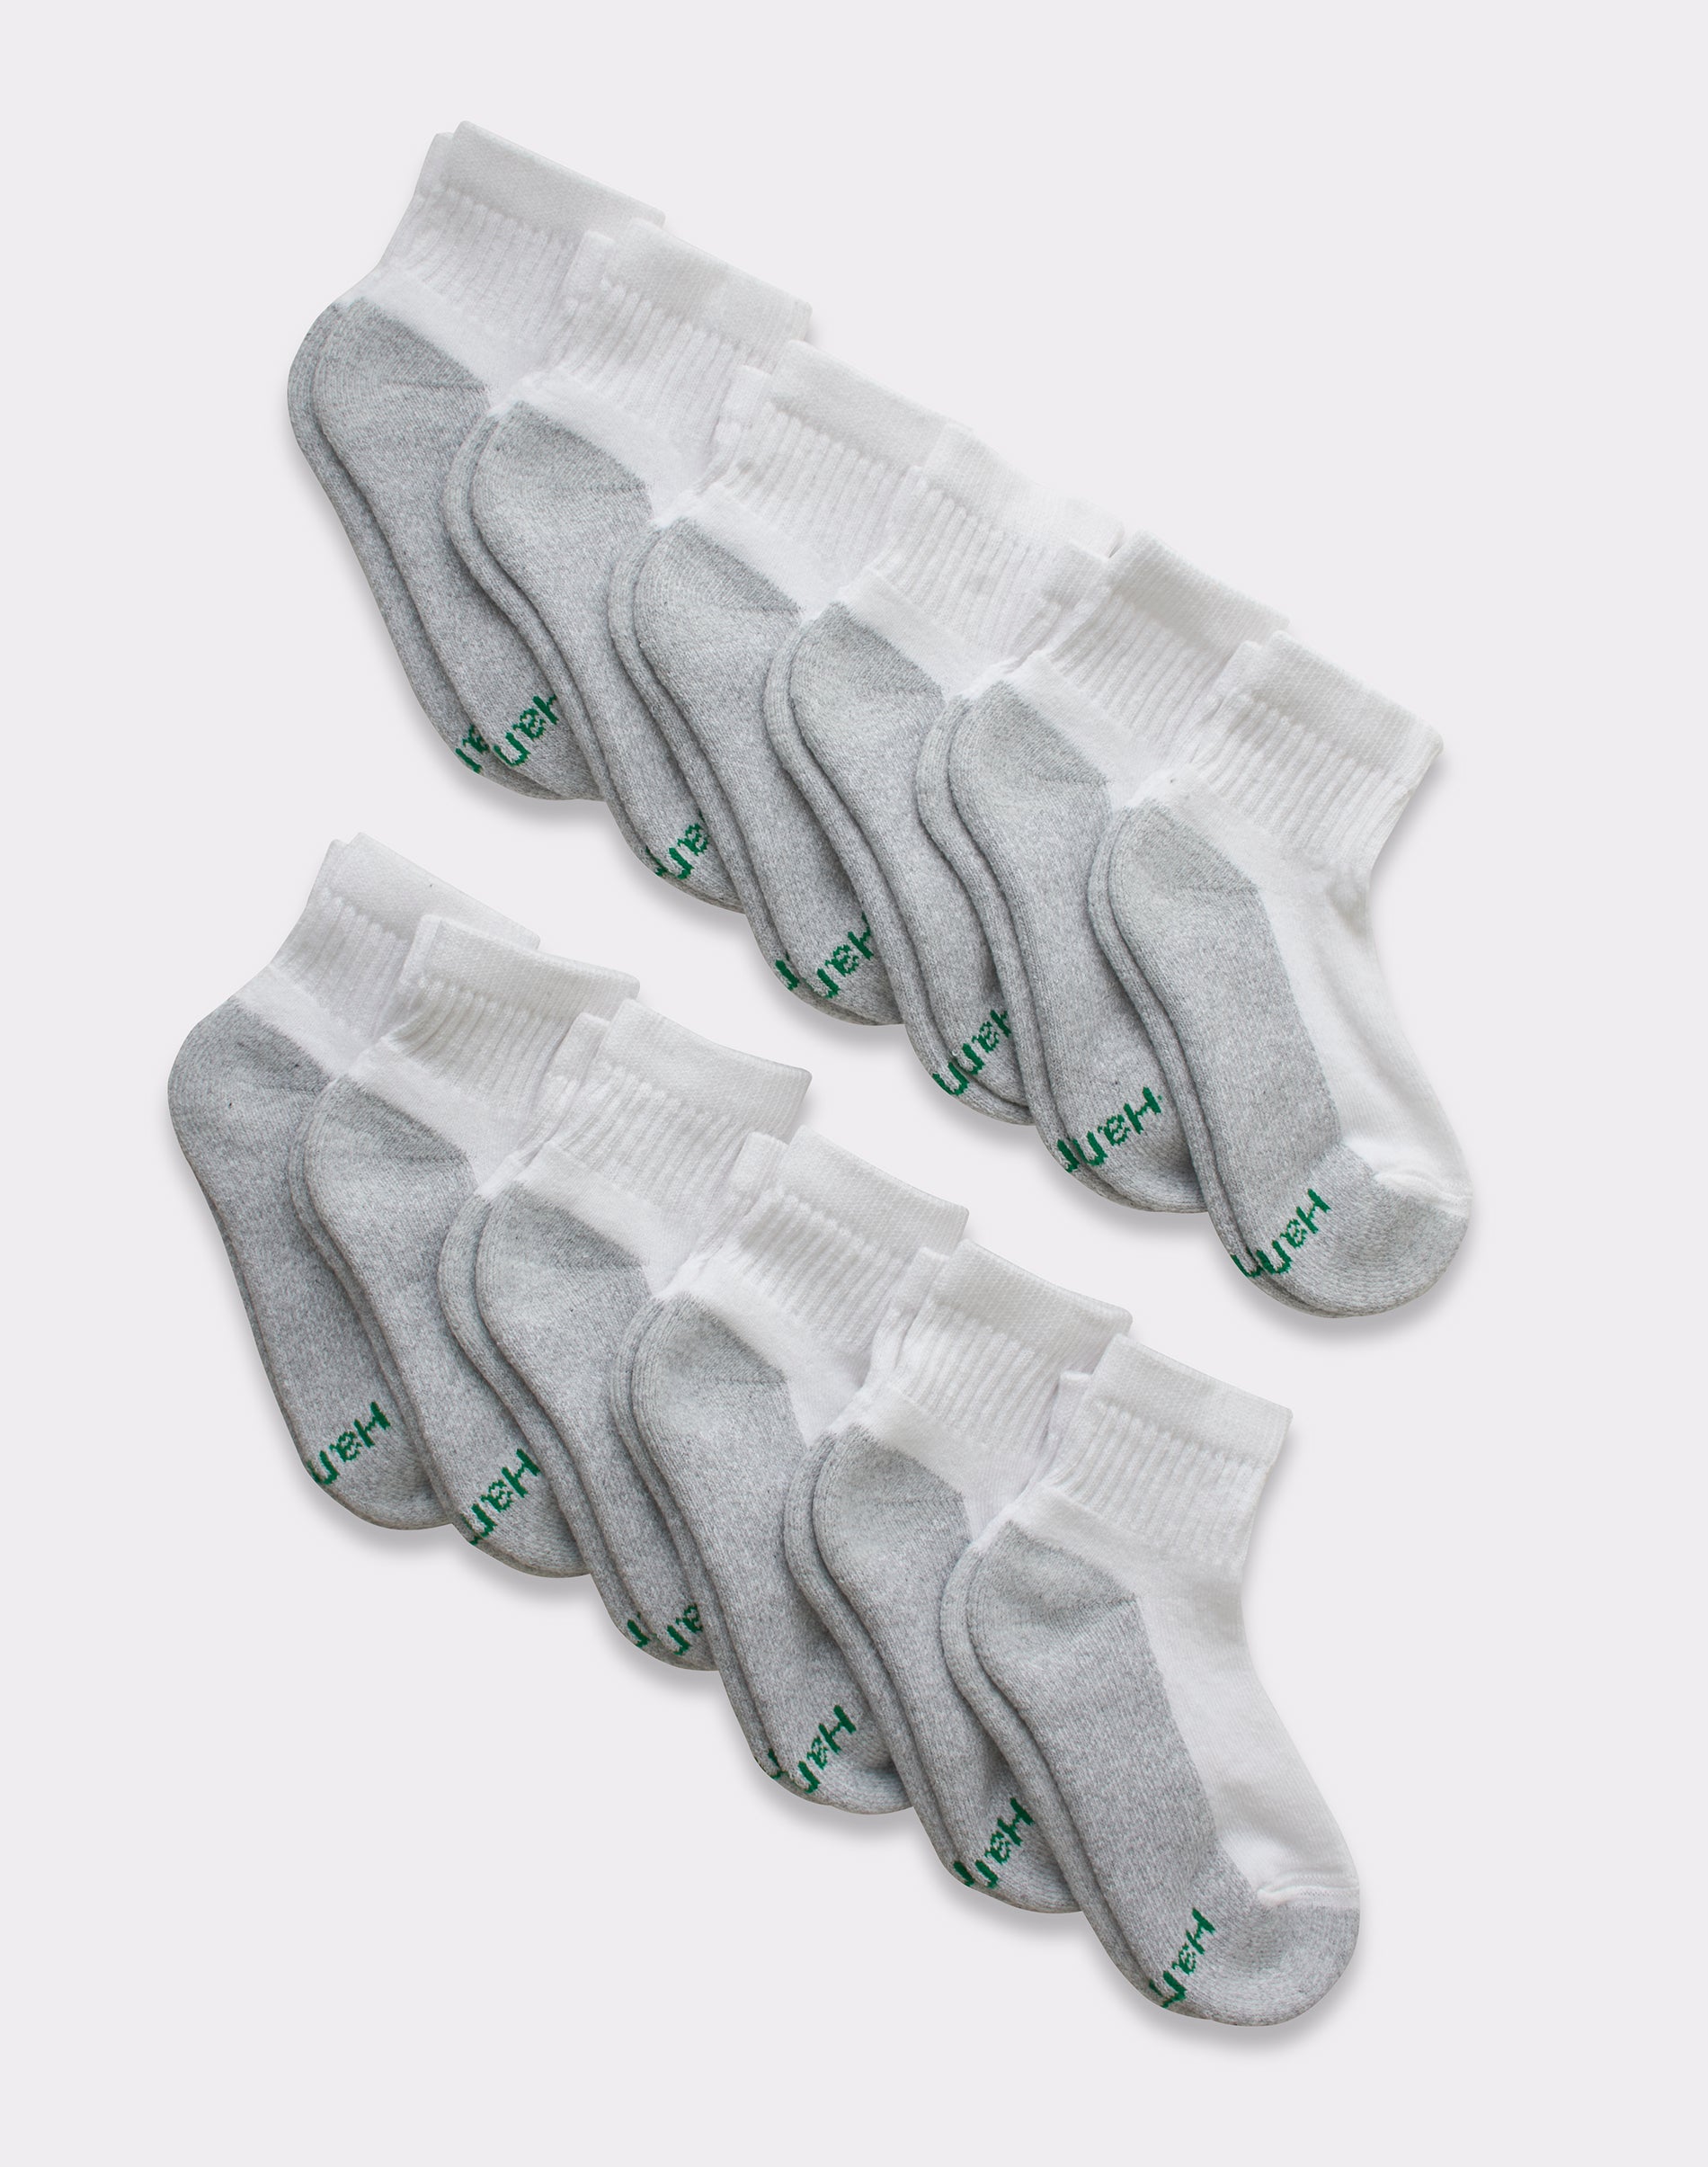 Hanes Boys Cushioned Ankle Socks 12-Pack